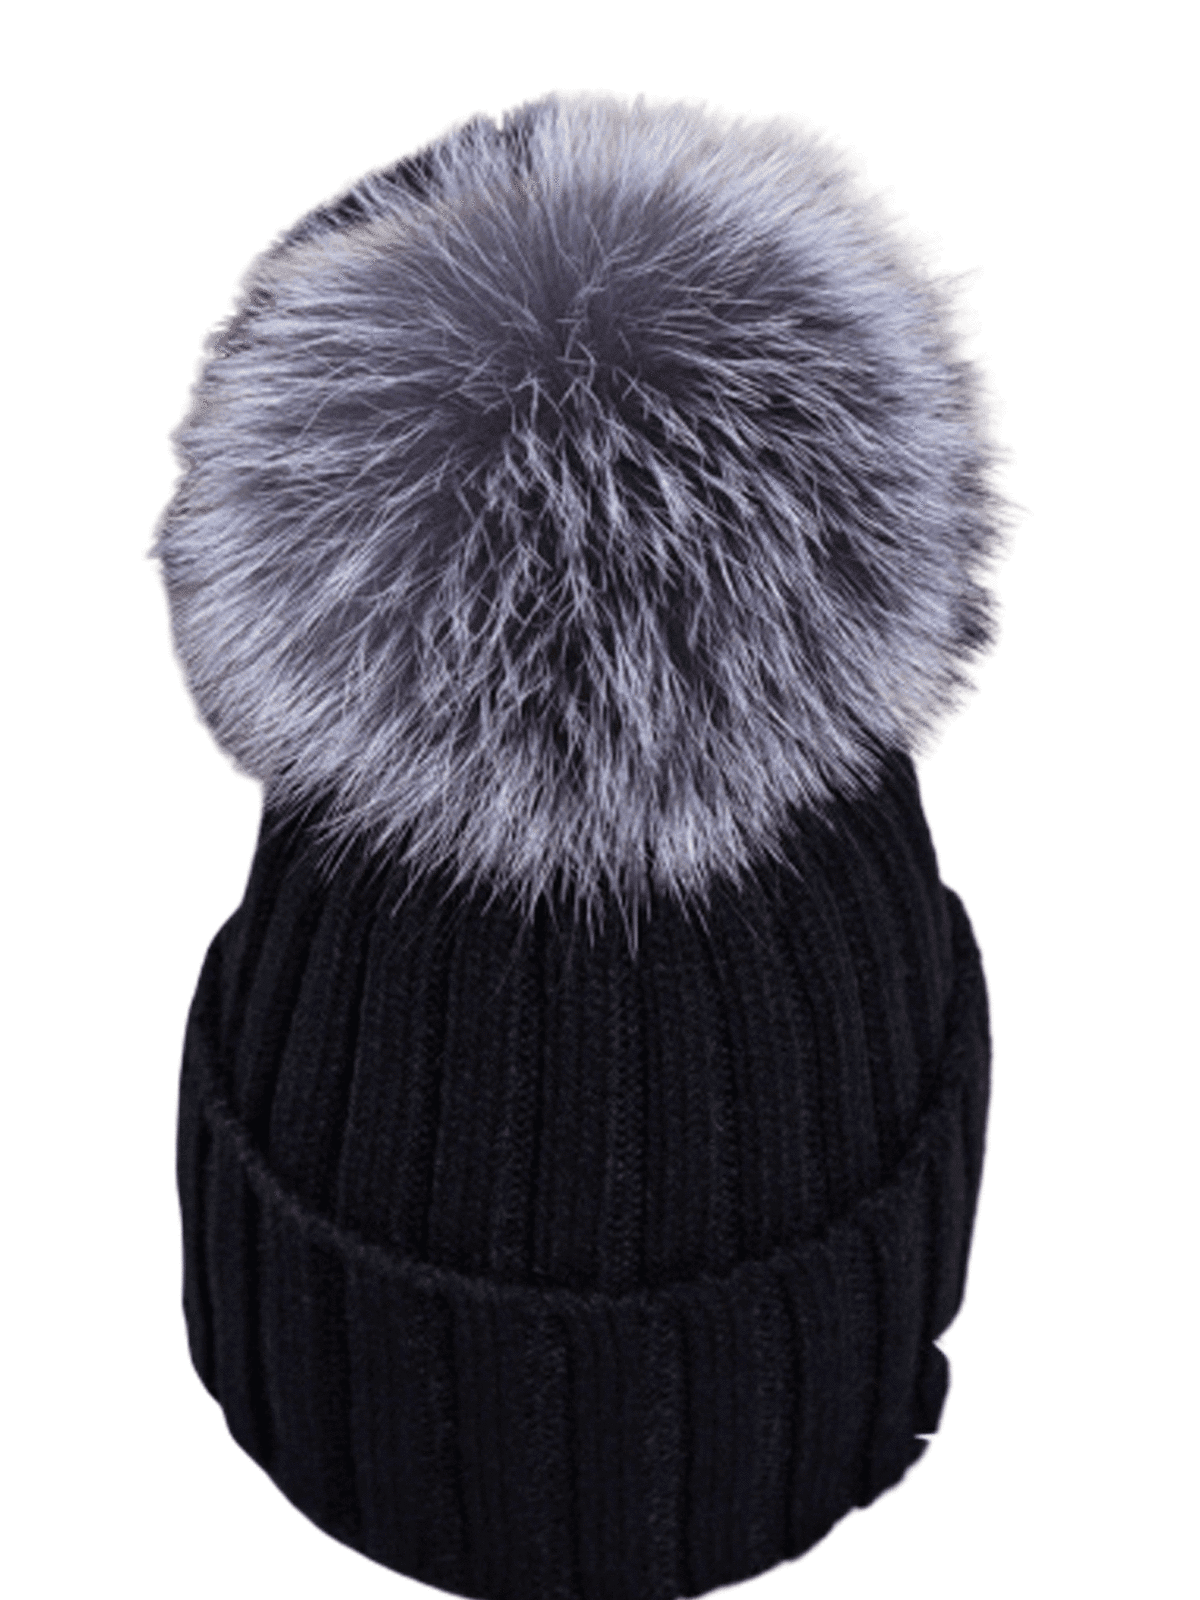 Beanie Hats Mens Womens Bobble Pom Pom Hat Ski Winter Warm Cable Knitted Cap 